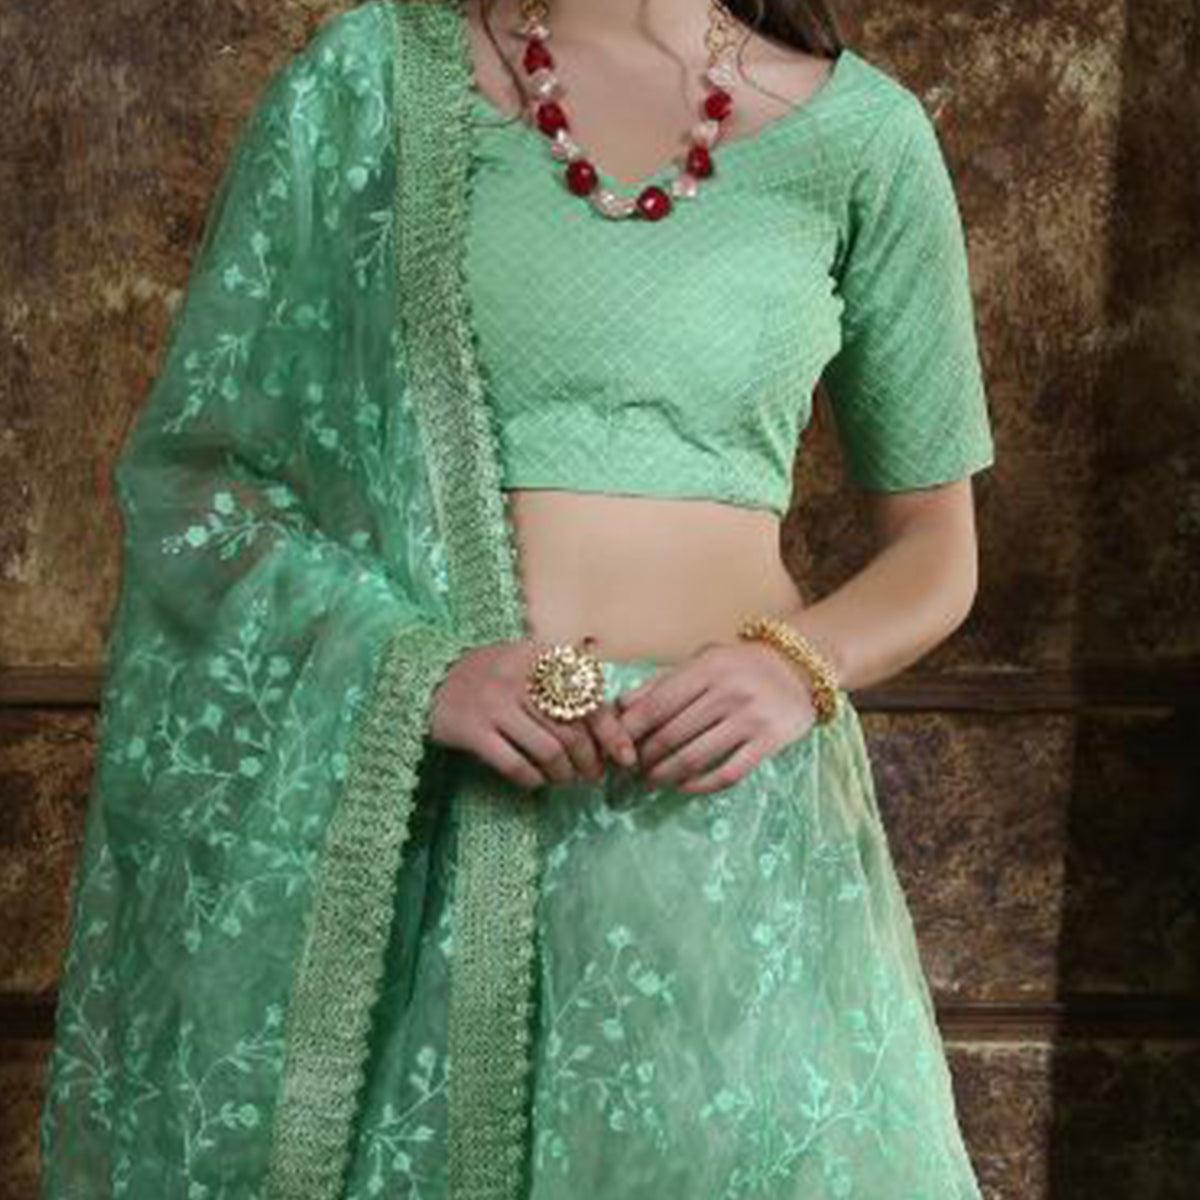 Alluring Mint Green Colored Party Wear Embrodiered Organza Lehenga Choli - Peachmode